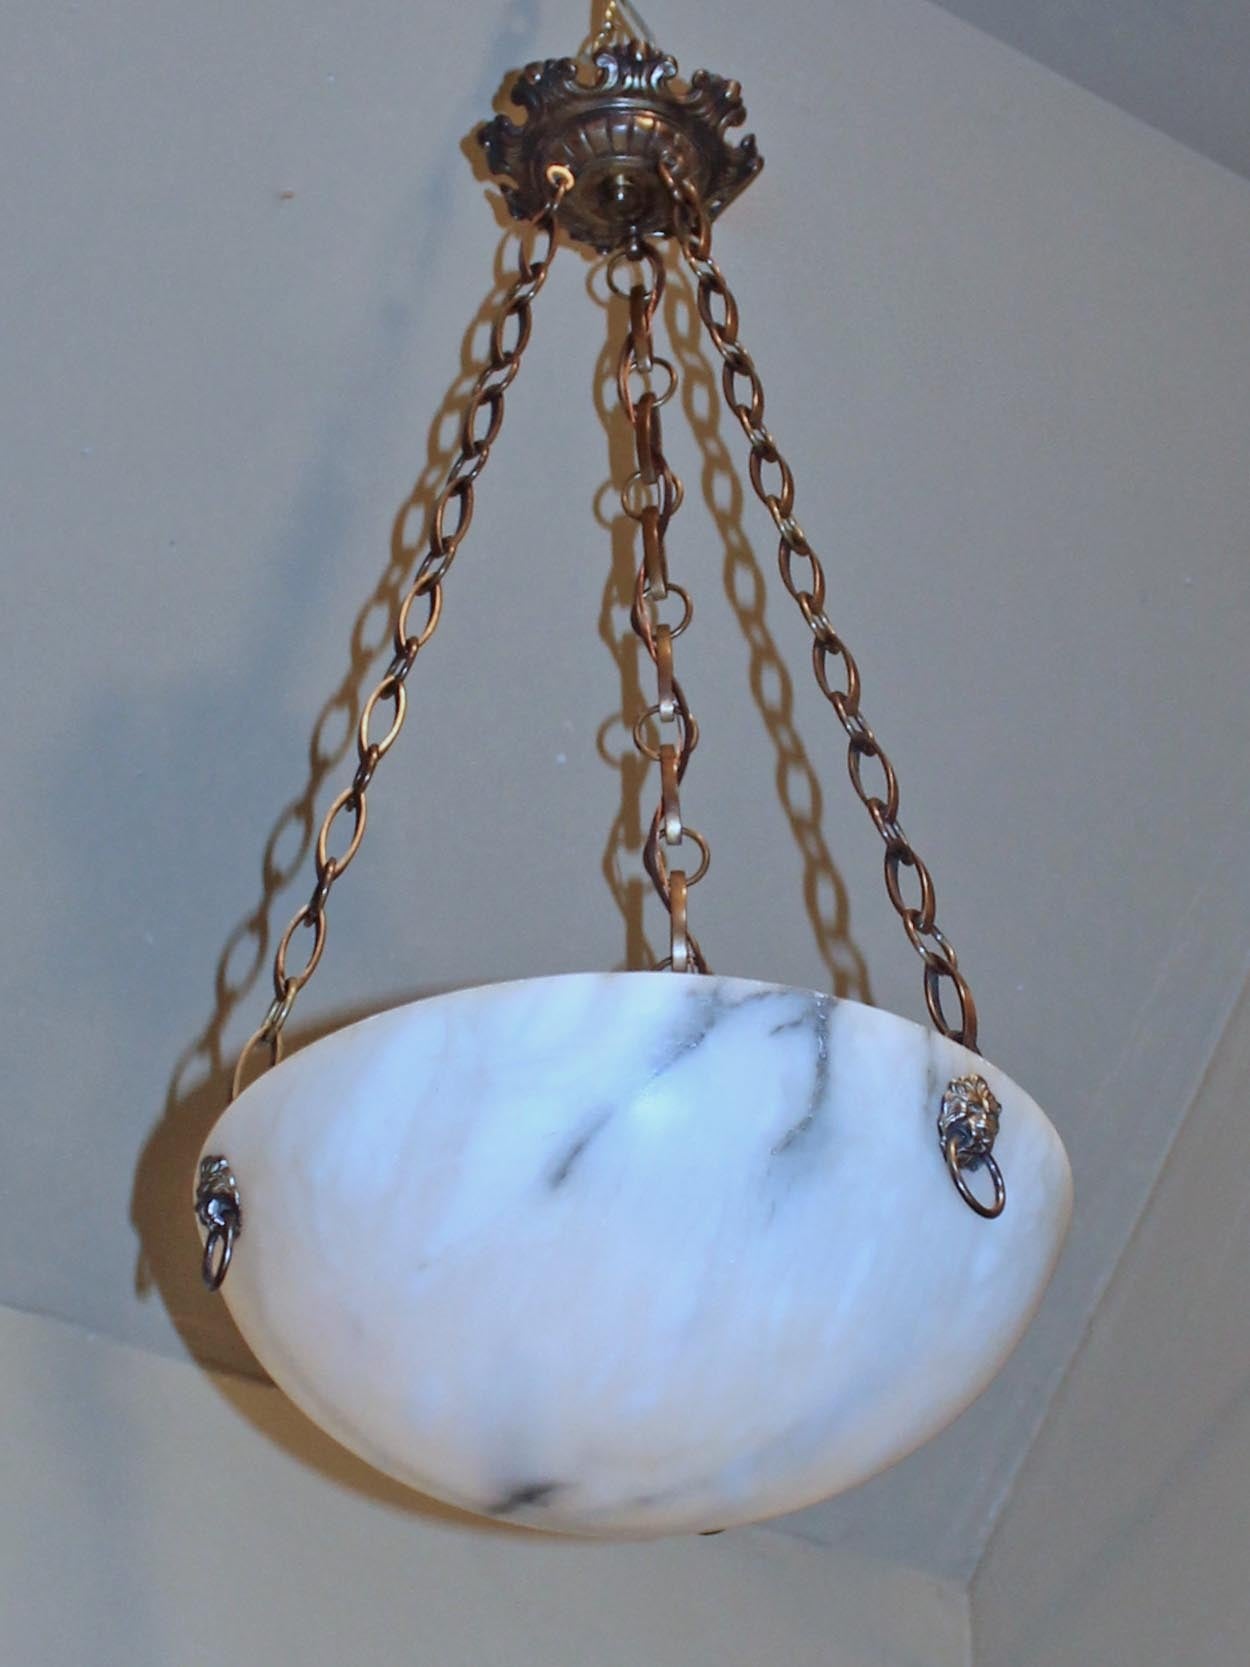 French alabaster chandelier or pendant with brass patinated fittings in the Second Empire style including lion head escutcheons. Newly wired. Uses 3 - 40 watt max candelabra base bulbs.